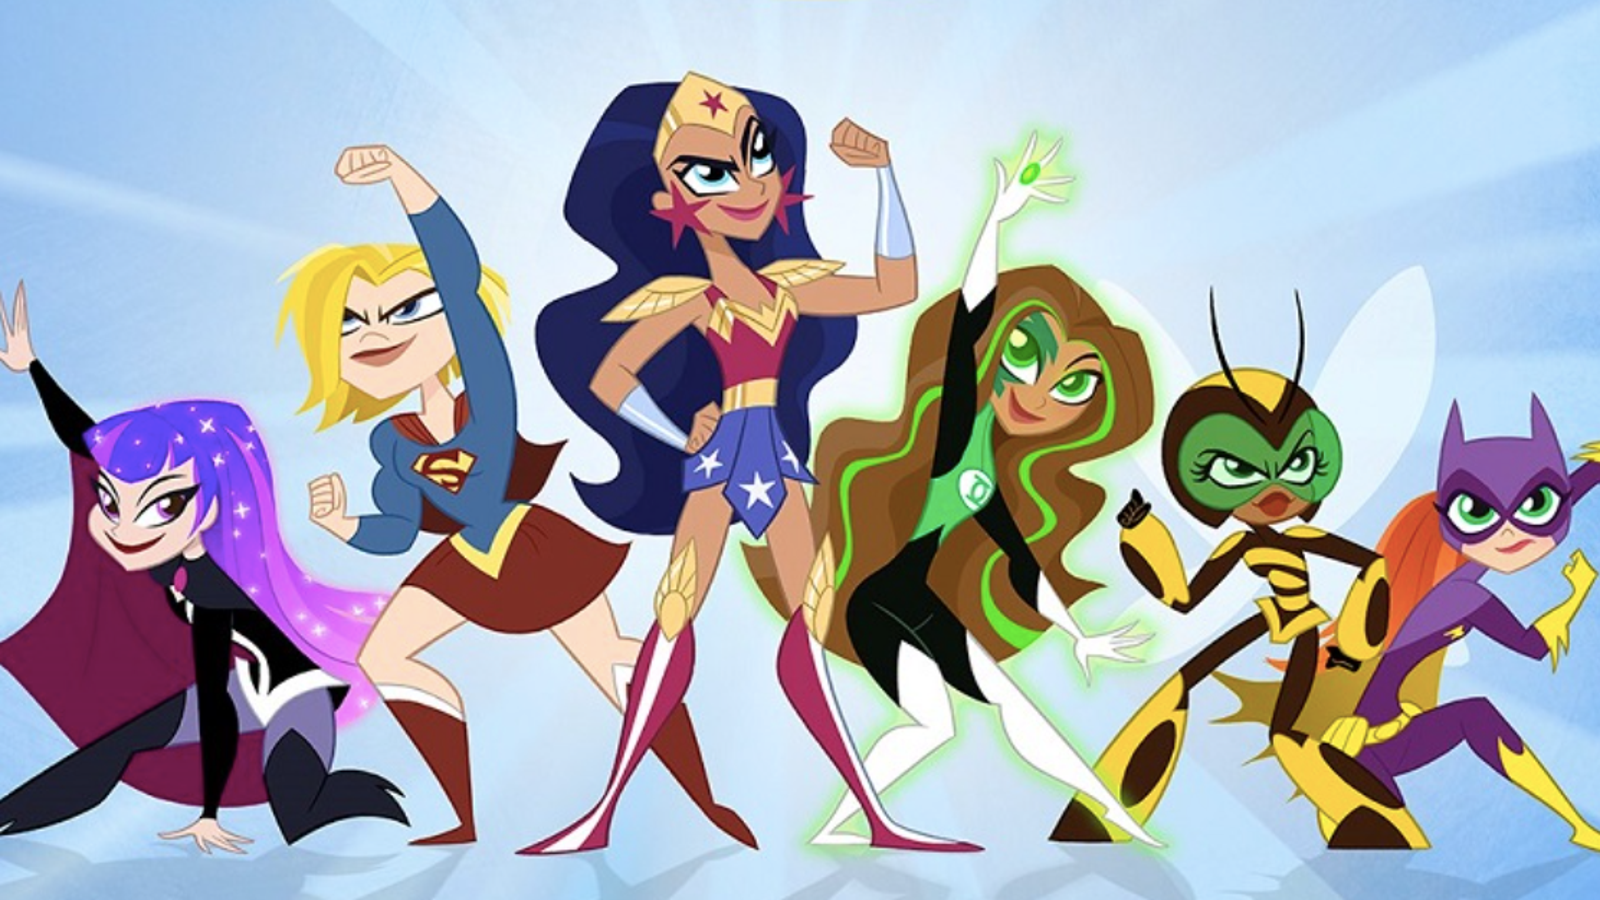 Dc S Super Hero Girls Are Getting Some Kickass New Designs For Their Upcoming Tv Series